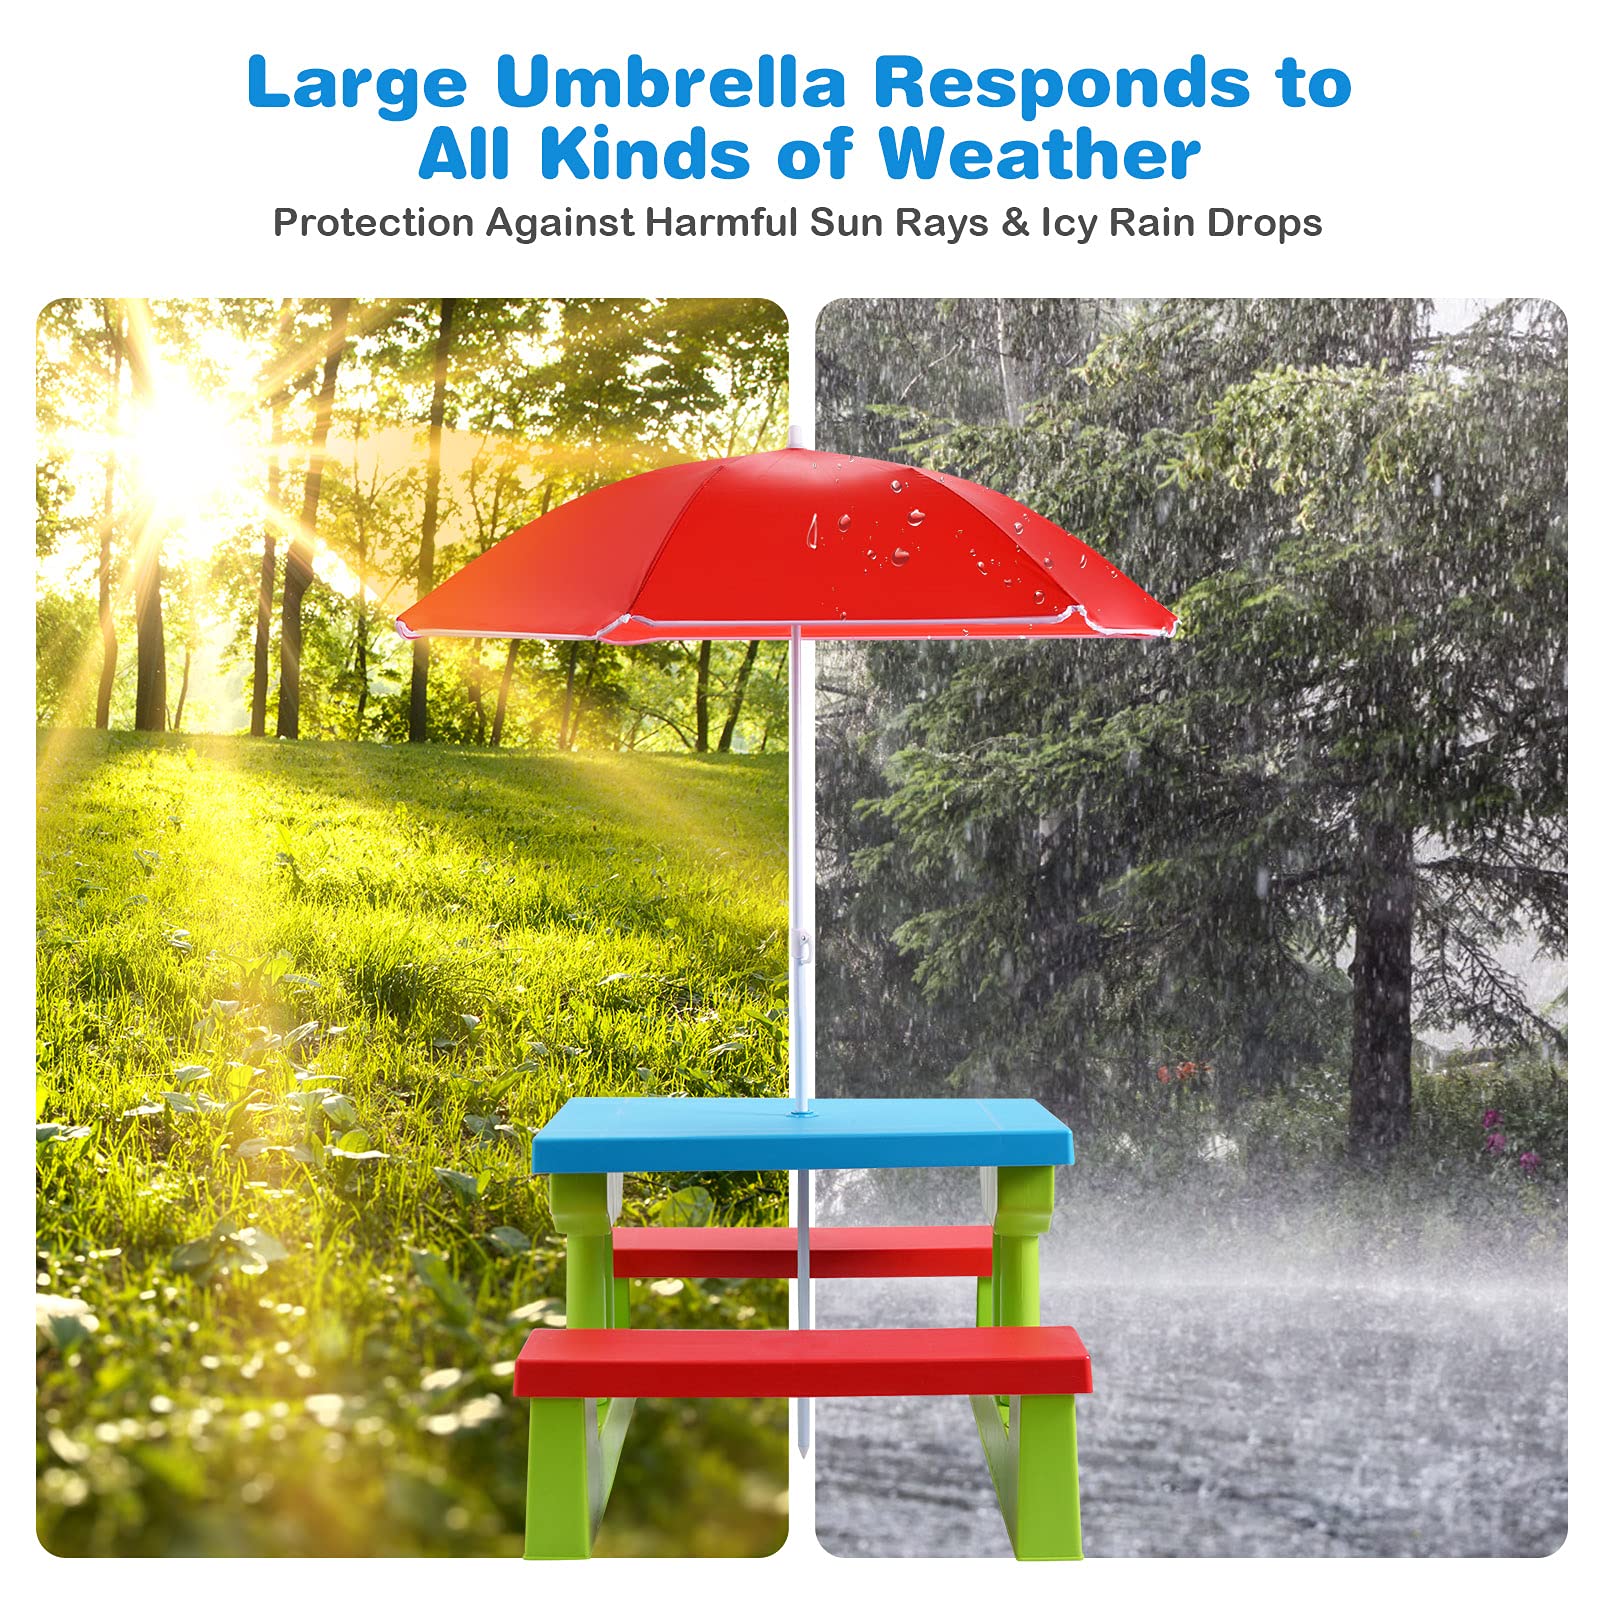 ARMILE Kids Picnic Table, Kids Indoor & Outdoor Table and Bench Set with Removable & Foldable Umbrella, Portable Toddler Plastic Picnic Table for Patio, Backyard, Ideal Gift for Boys Girls(Red)